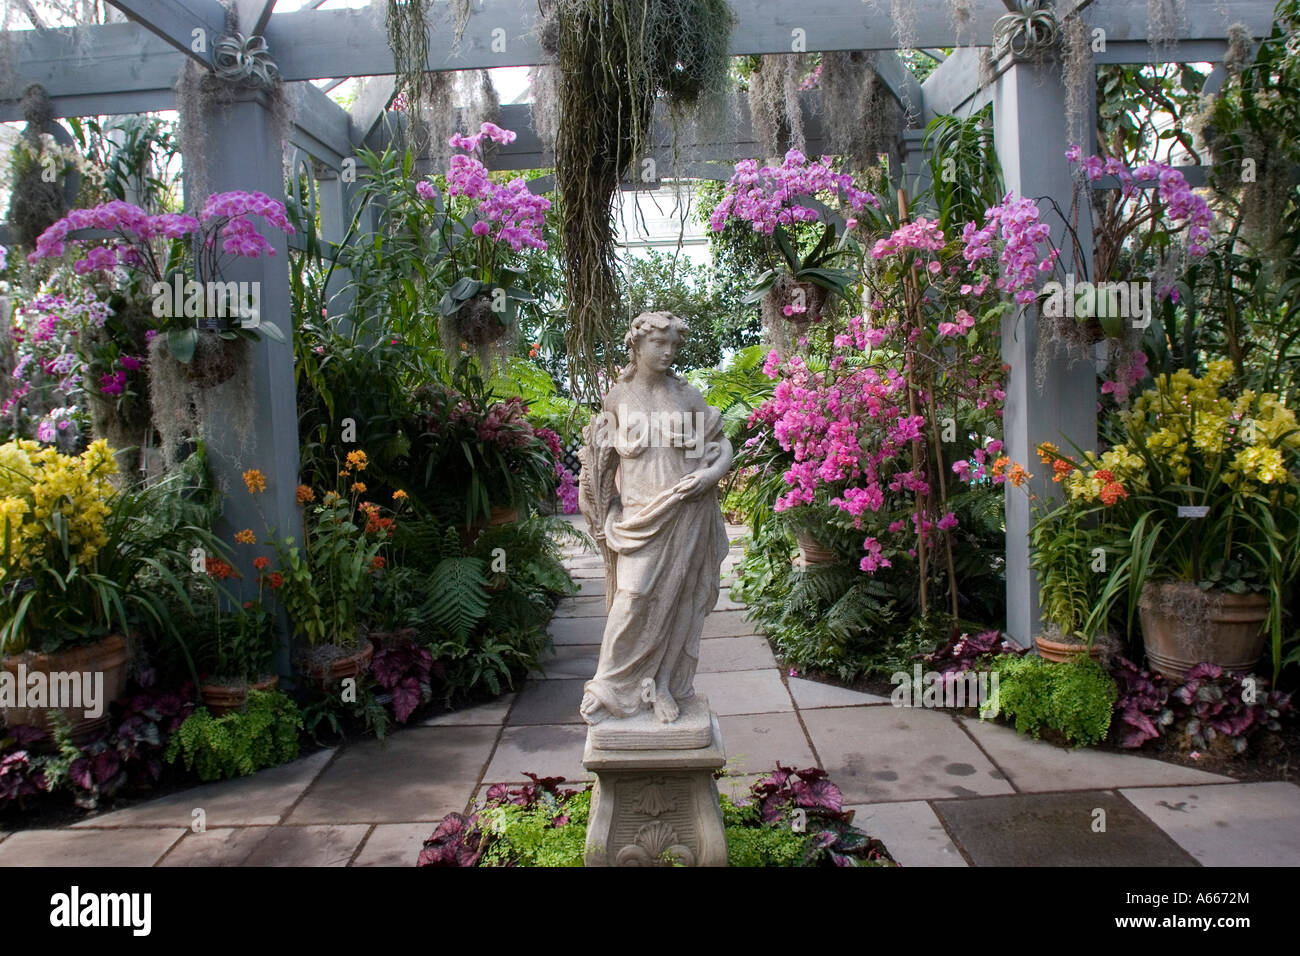 Orchidee Show In Enid A Haupt Konservatorium In New York Botanical